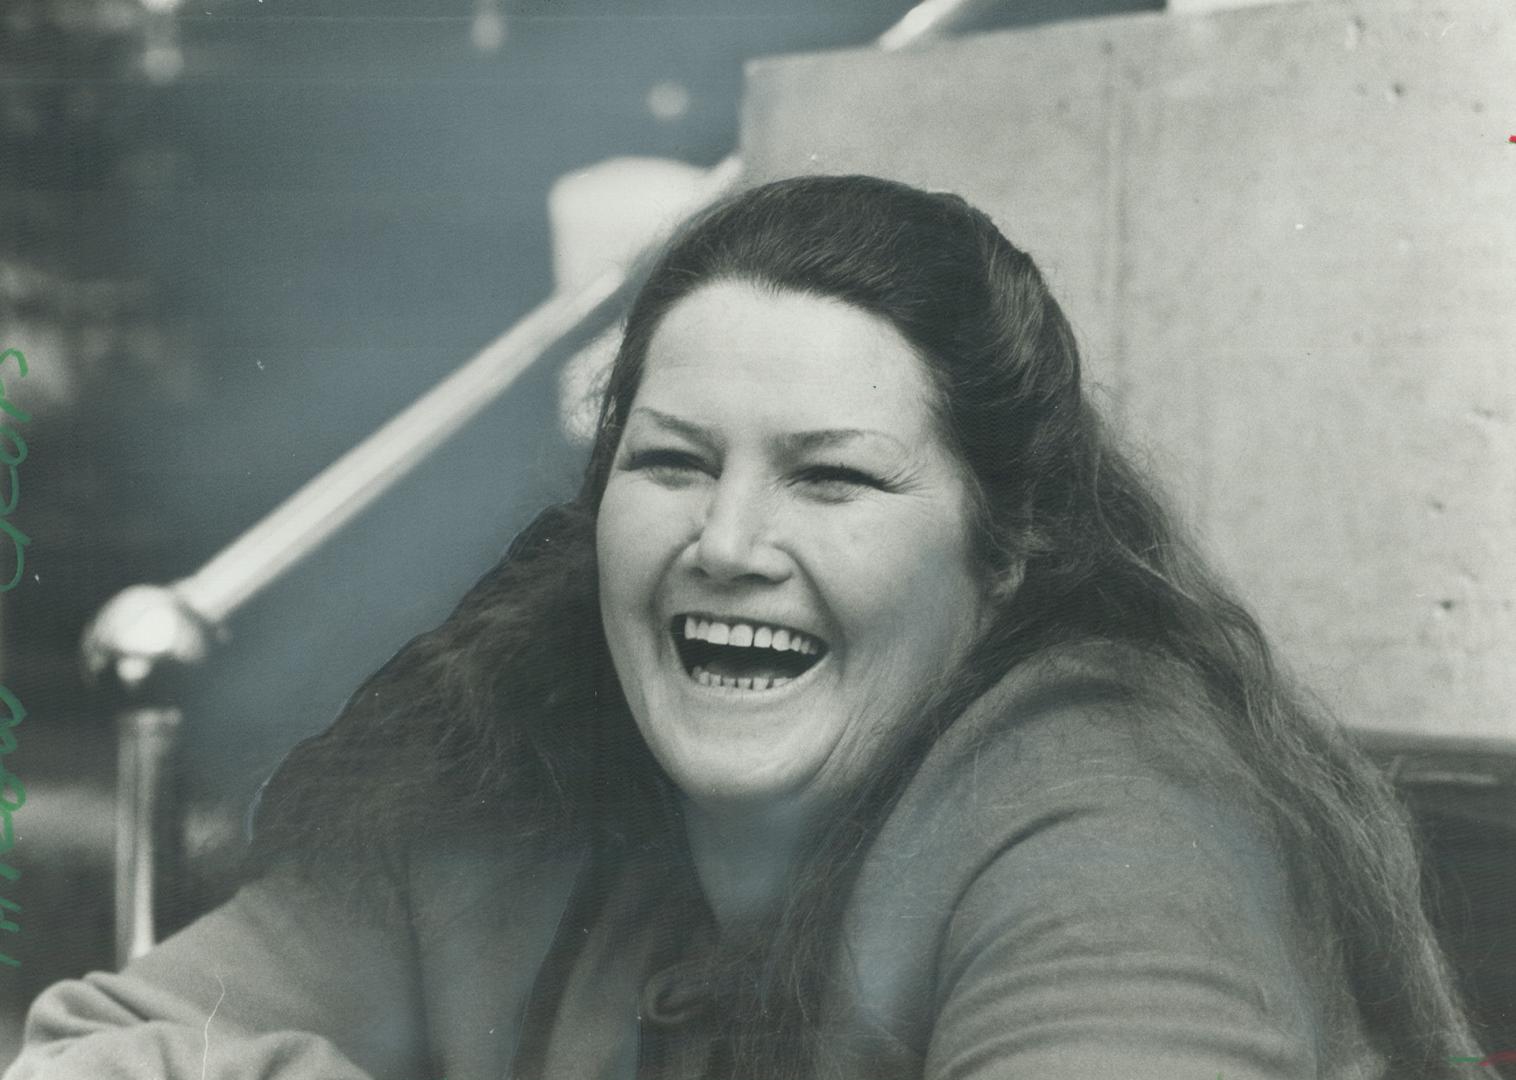 Happiness is a hit novel. And writer Colleen McCullough's Pacific island